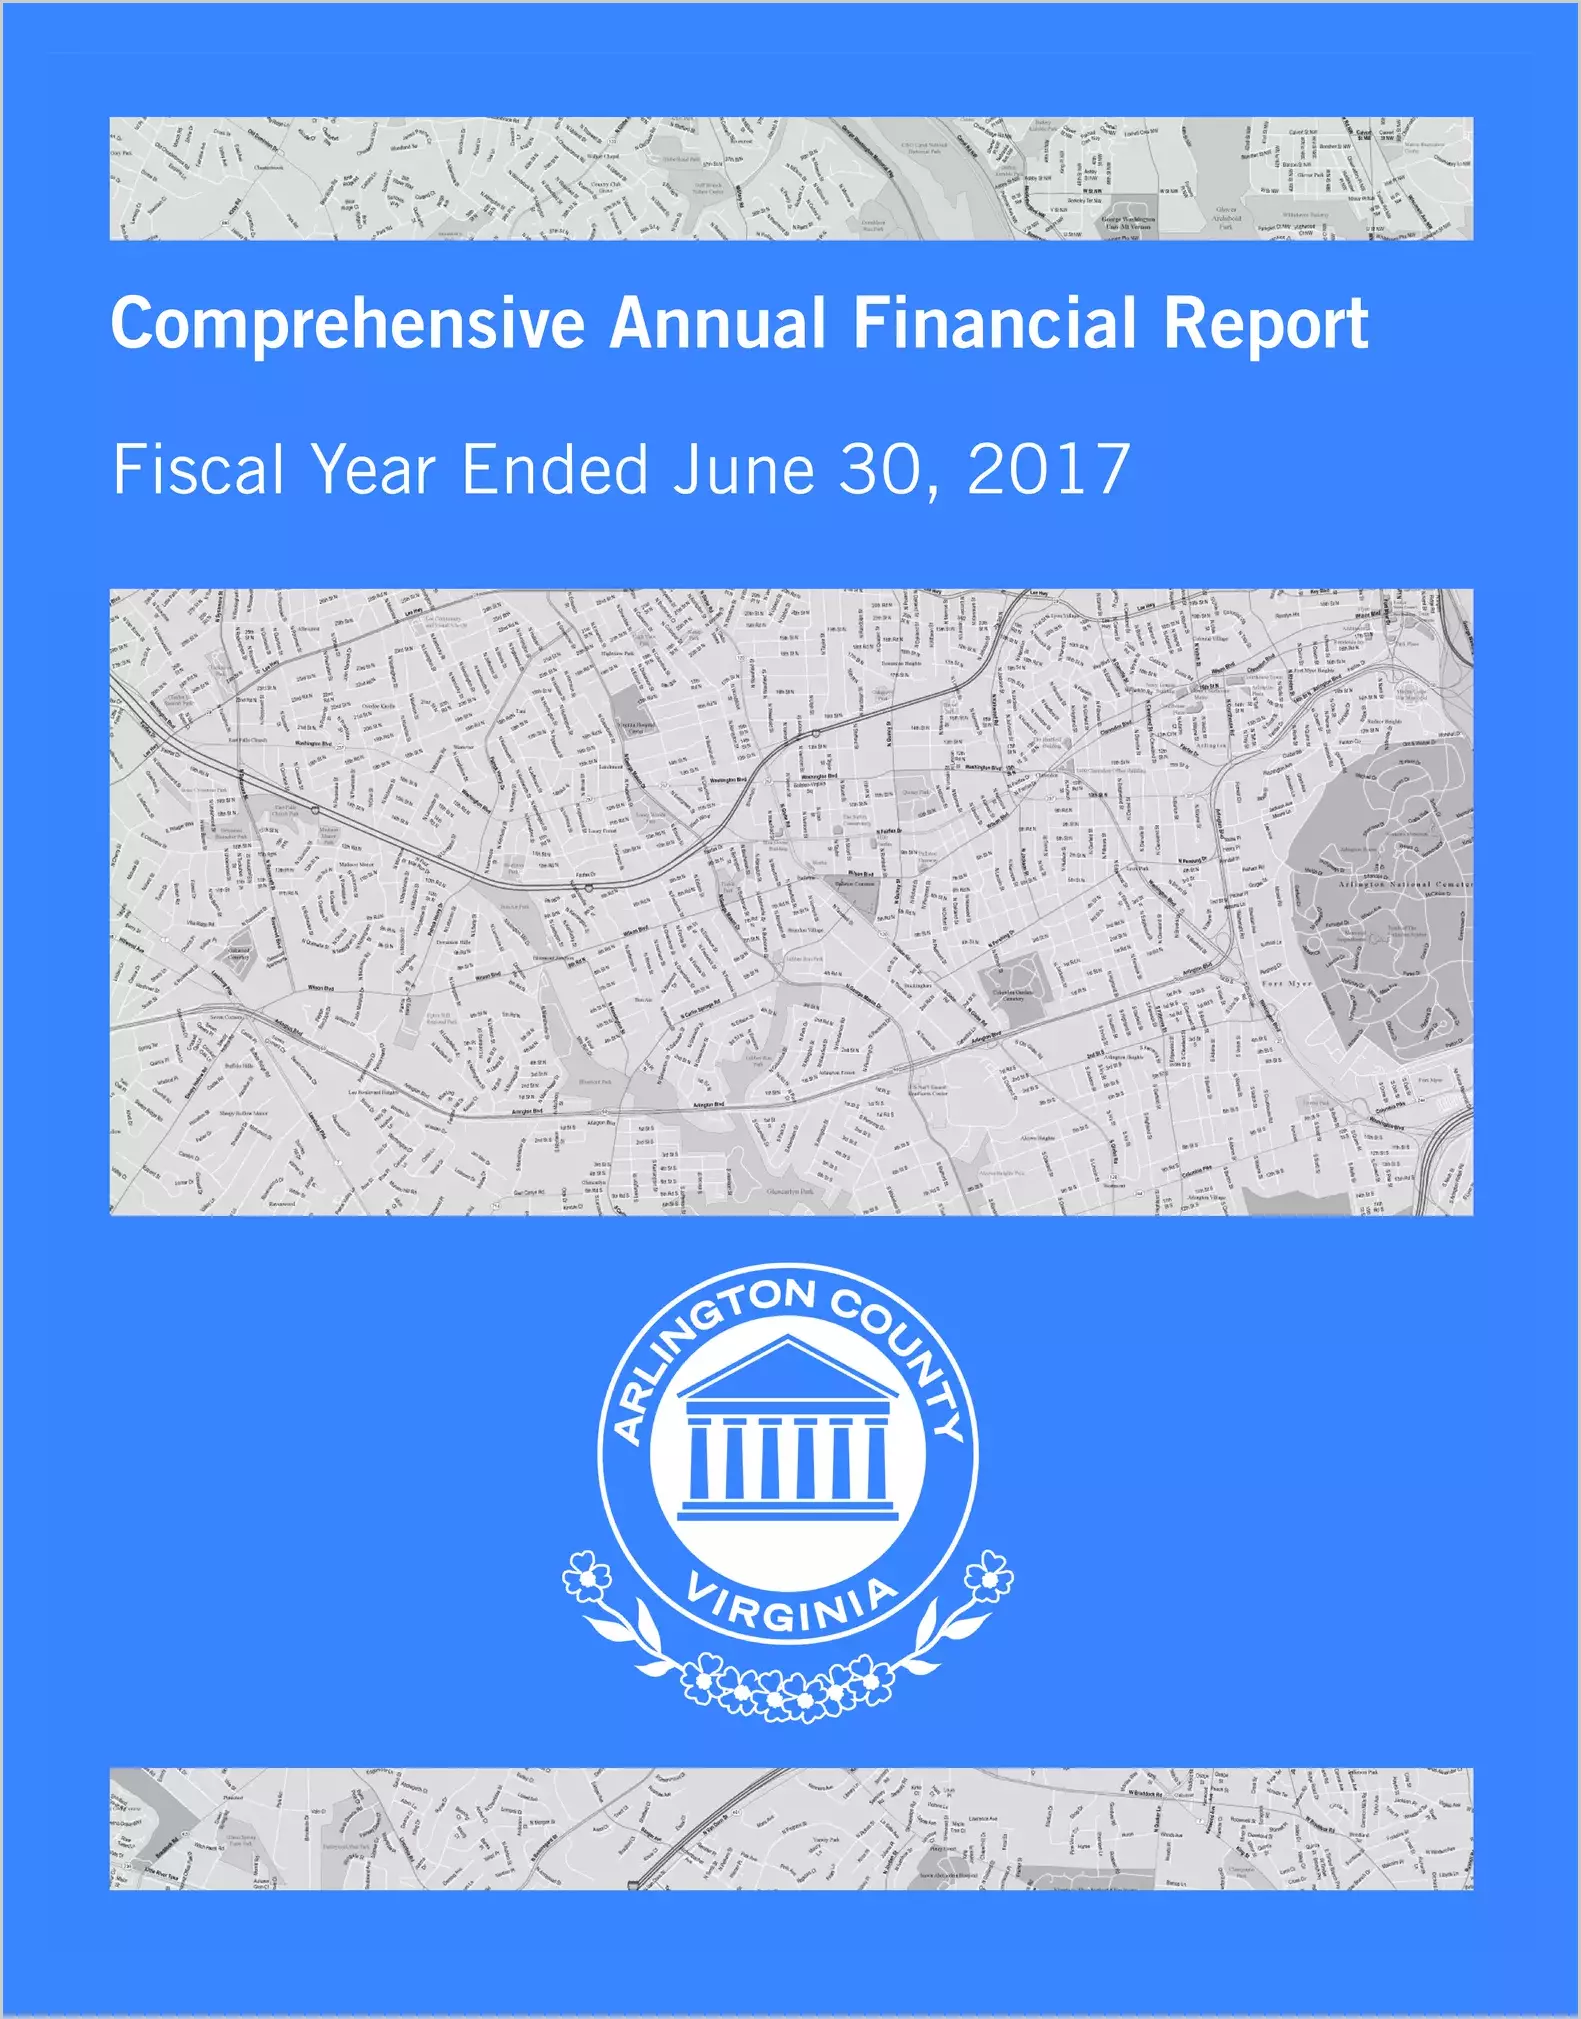 2017 Annual Financial Report for County of Arlington